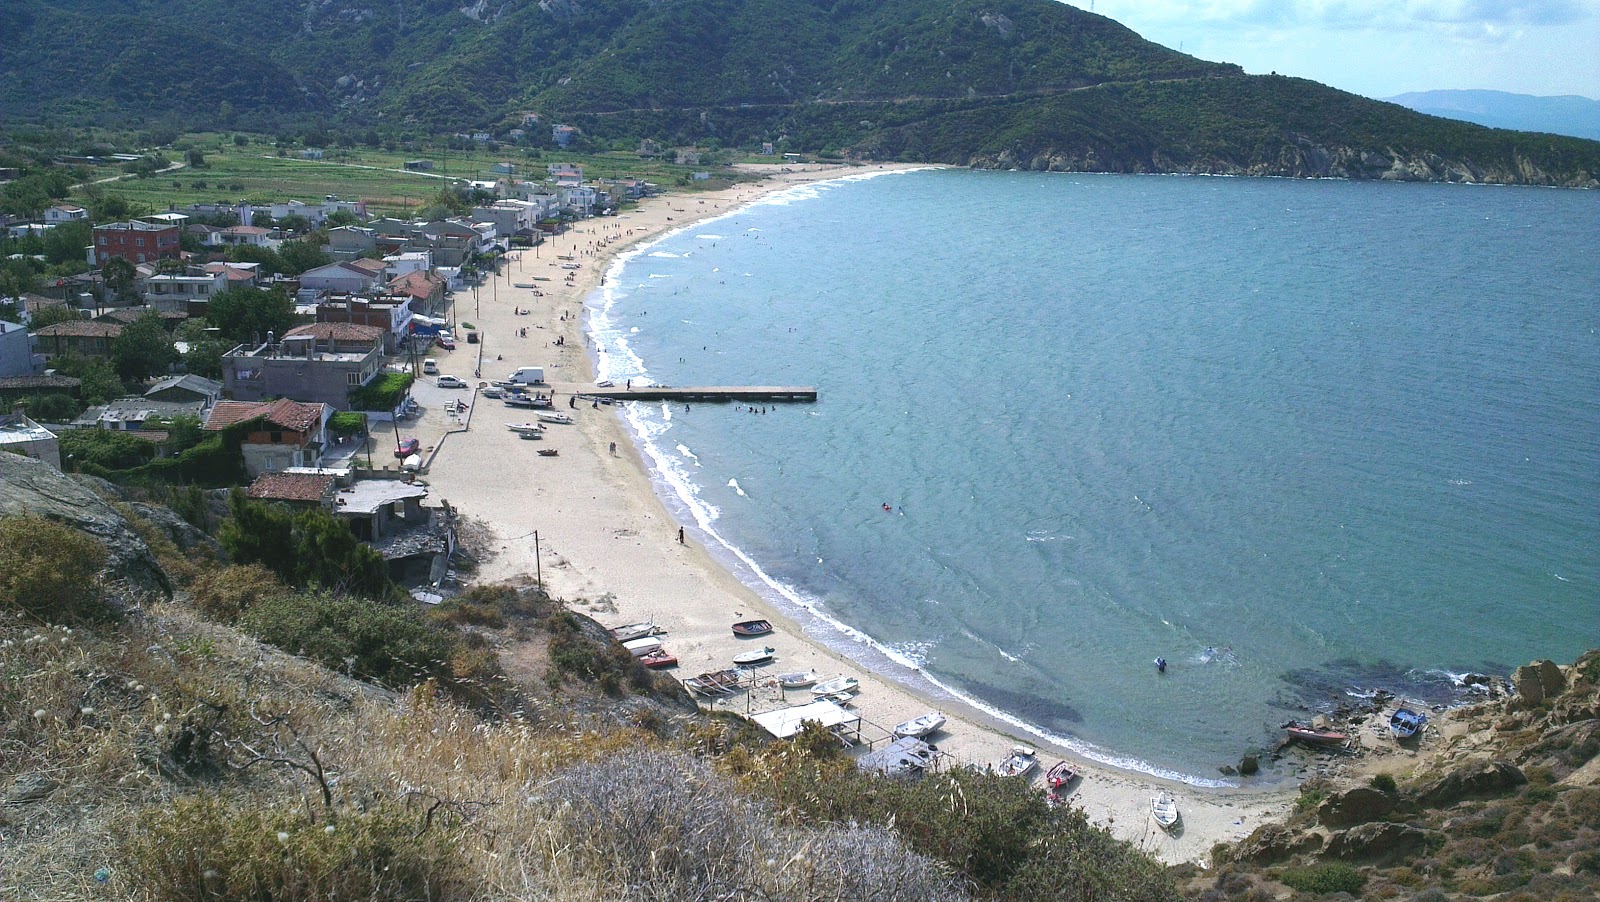 Photo of Ormanli beach backed by cliffs